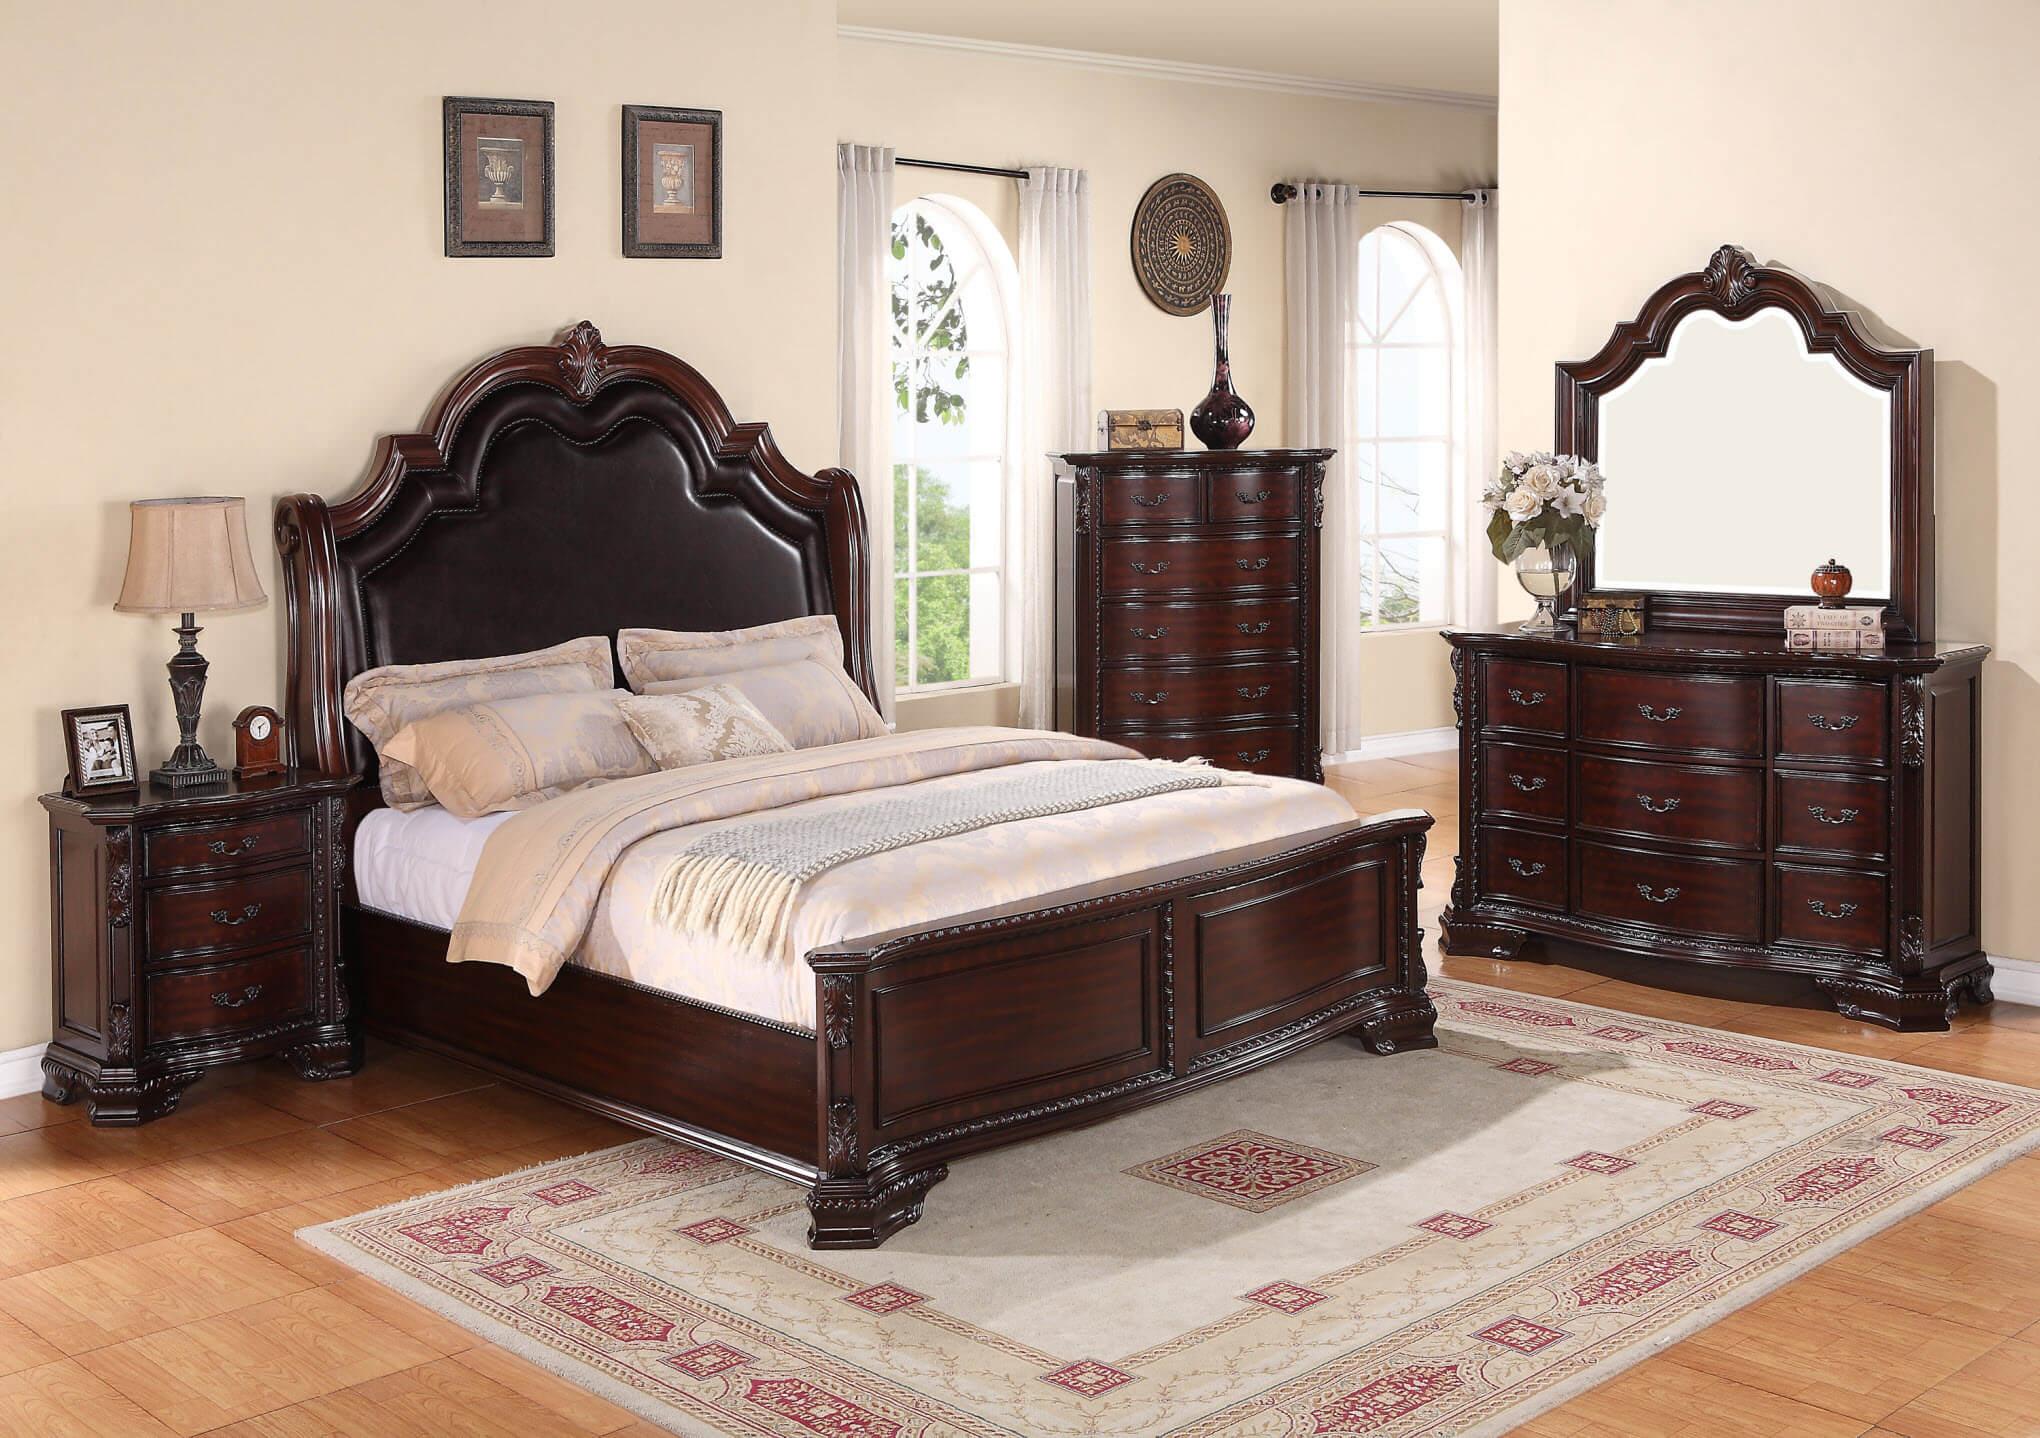 Classic, Vintage Panel Bedroom Set Sheffield B1100-Q-Bed-6pcs in Brown PU